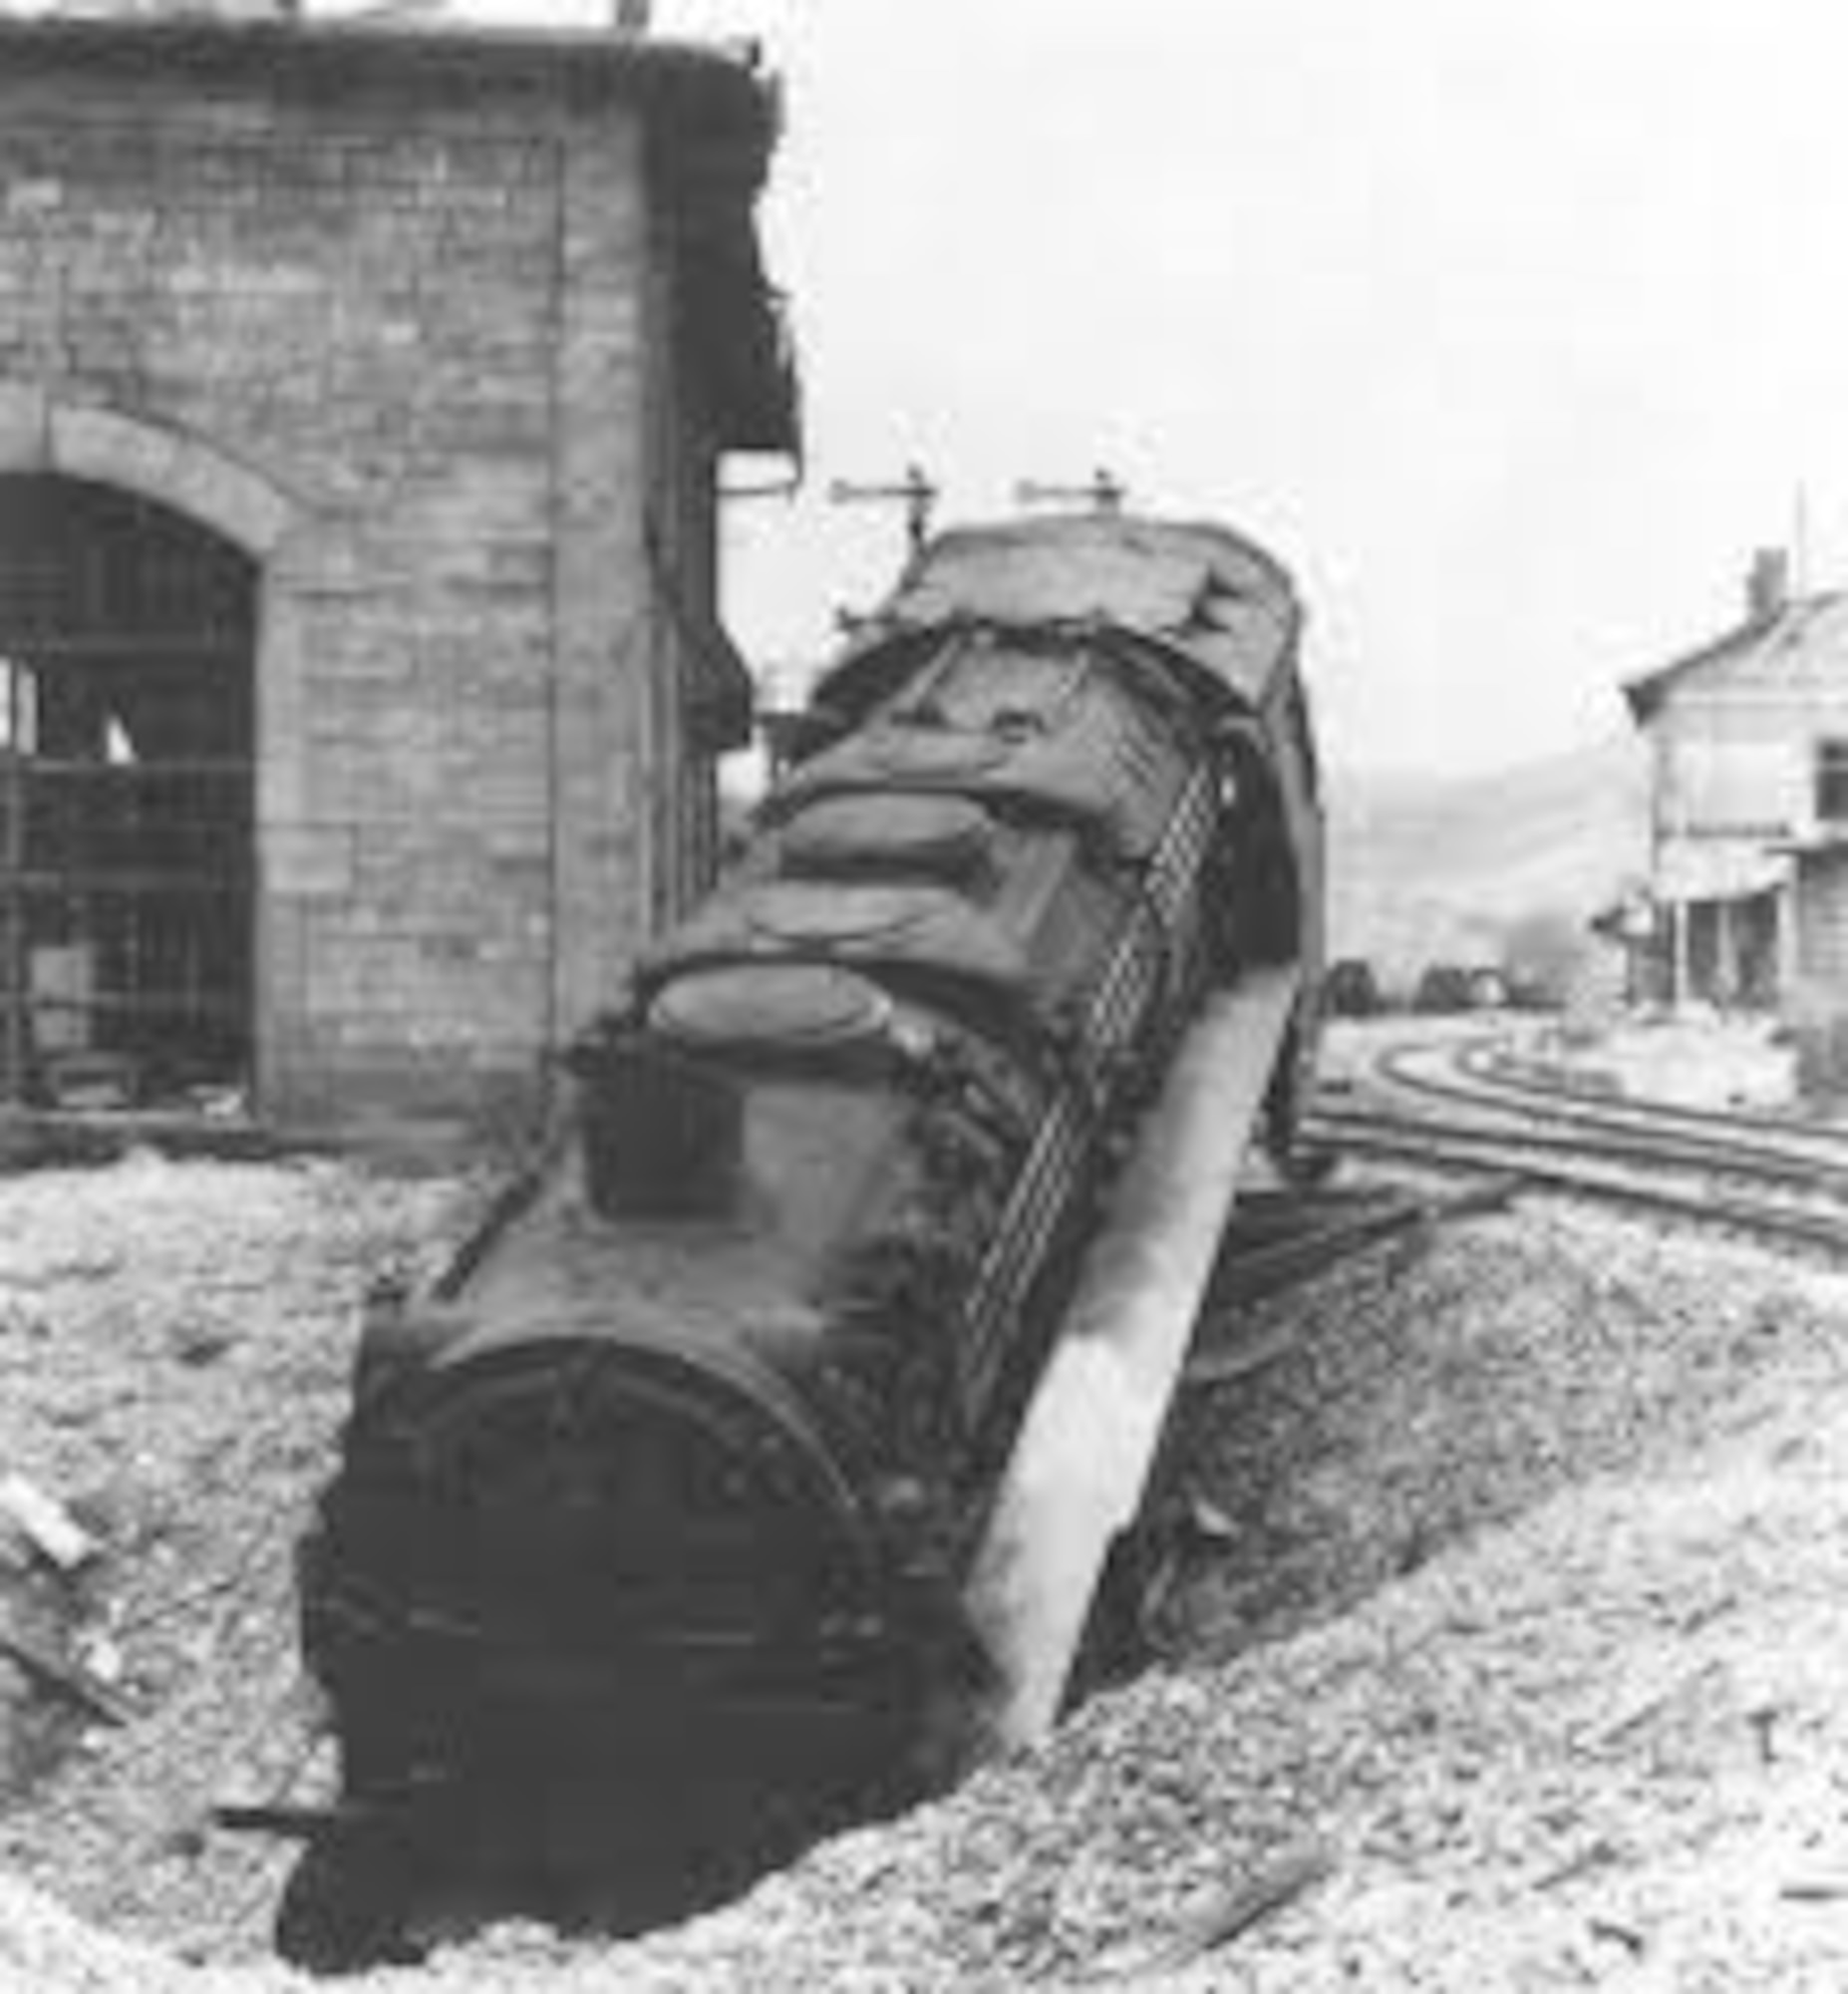 A French locomotive knocked off the tracks at a French rail center after an aerial attack. During the conduct of the Transportation Plan, Allied planners discovered that the German authorities could relatively replace destroyed and damaged freight cars by transferring freight cars from Germany and further east to France. However, destroyed or heavily damaged locomotives were not as easily replaced as the freight cars. (USAAF archival photo)